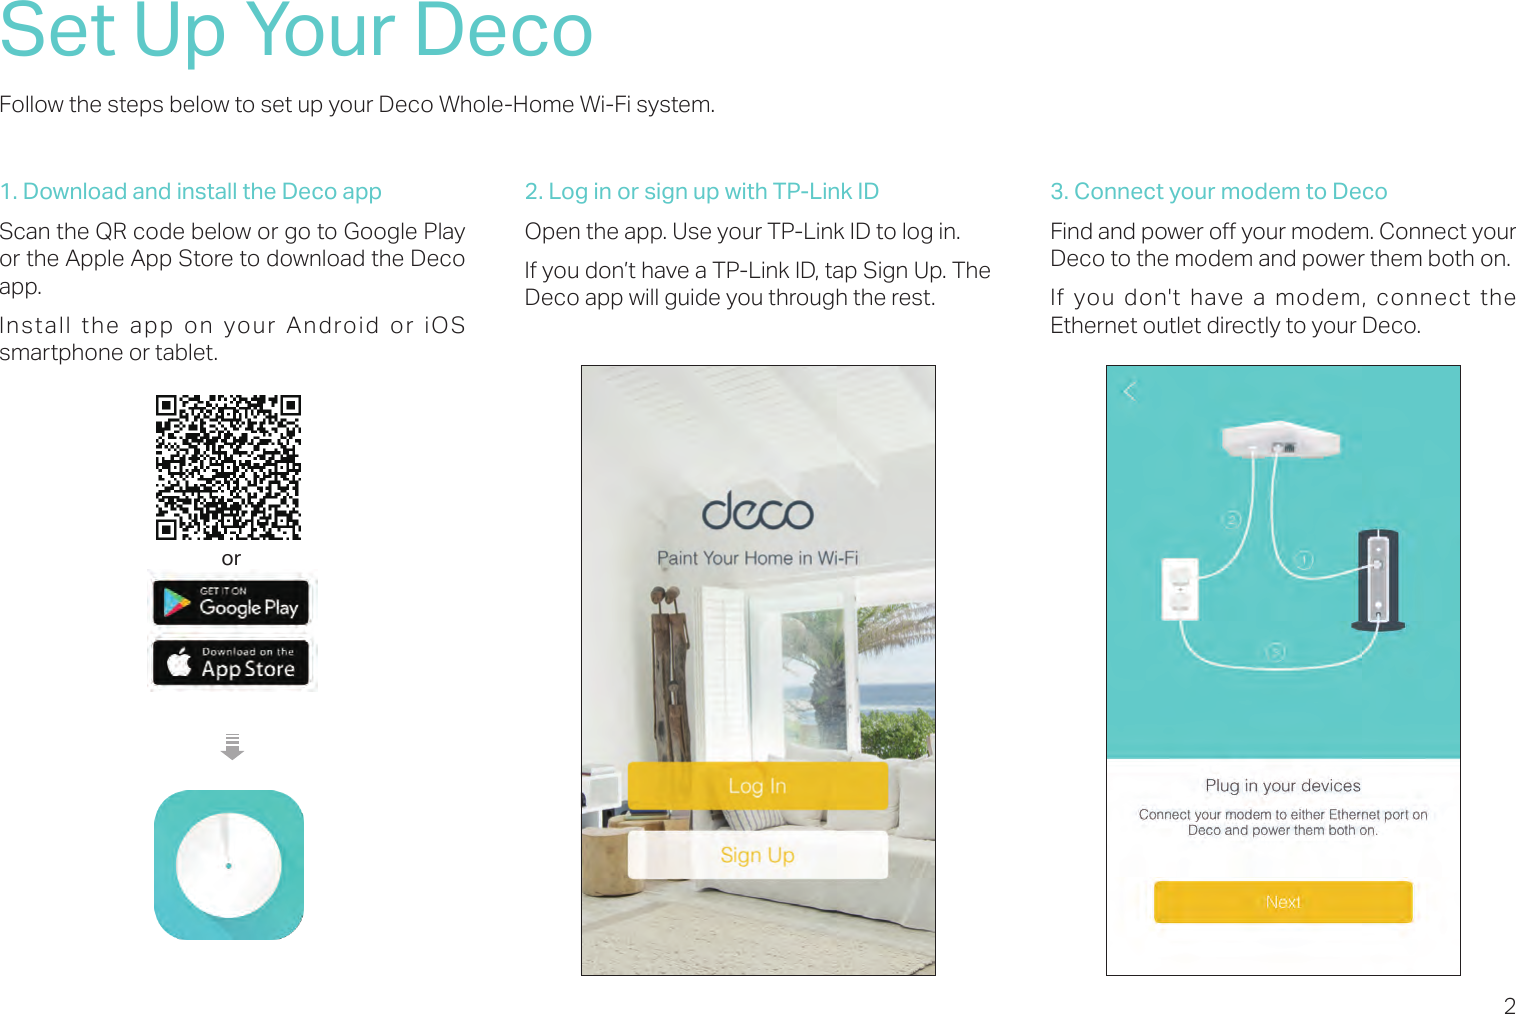 2Set Up Your DecoFollow the steps below to set up your Deco Whole-Home Wi-Fi system.1. Download and install the Deco appScan the QR code below or go to Google Play or the Apple App Store to download the Deco app. Install the app on your Android or iOS smartphone or tablet.or2. Log in or sign up with TP-Link IDOpen the app. Use your TP-Link ID to log in. If you don’t have a TP-Link ID, tap Sign Up. The Deco app will guide you through the rest.3. Connect your modem to DecoFind and power o your modem. Connect your Deco to the modem and power them both on.If you don&apos;t have a modem, connect the Ethernet outlet directly to your Deco.